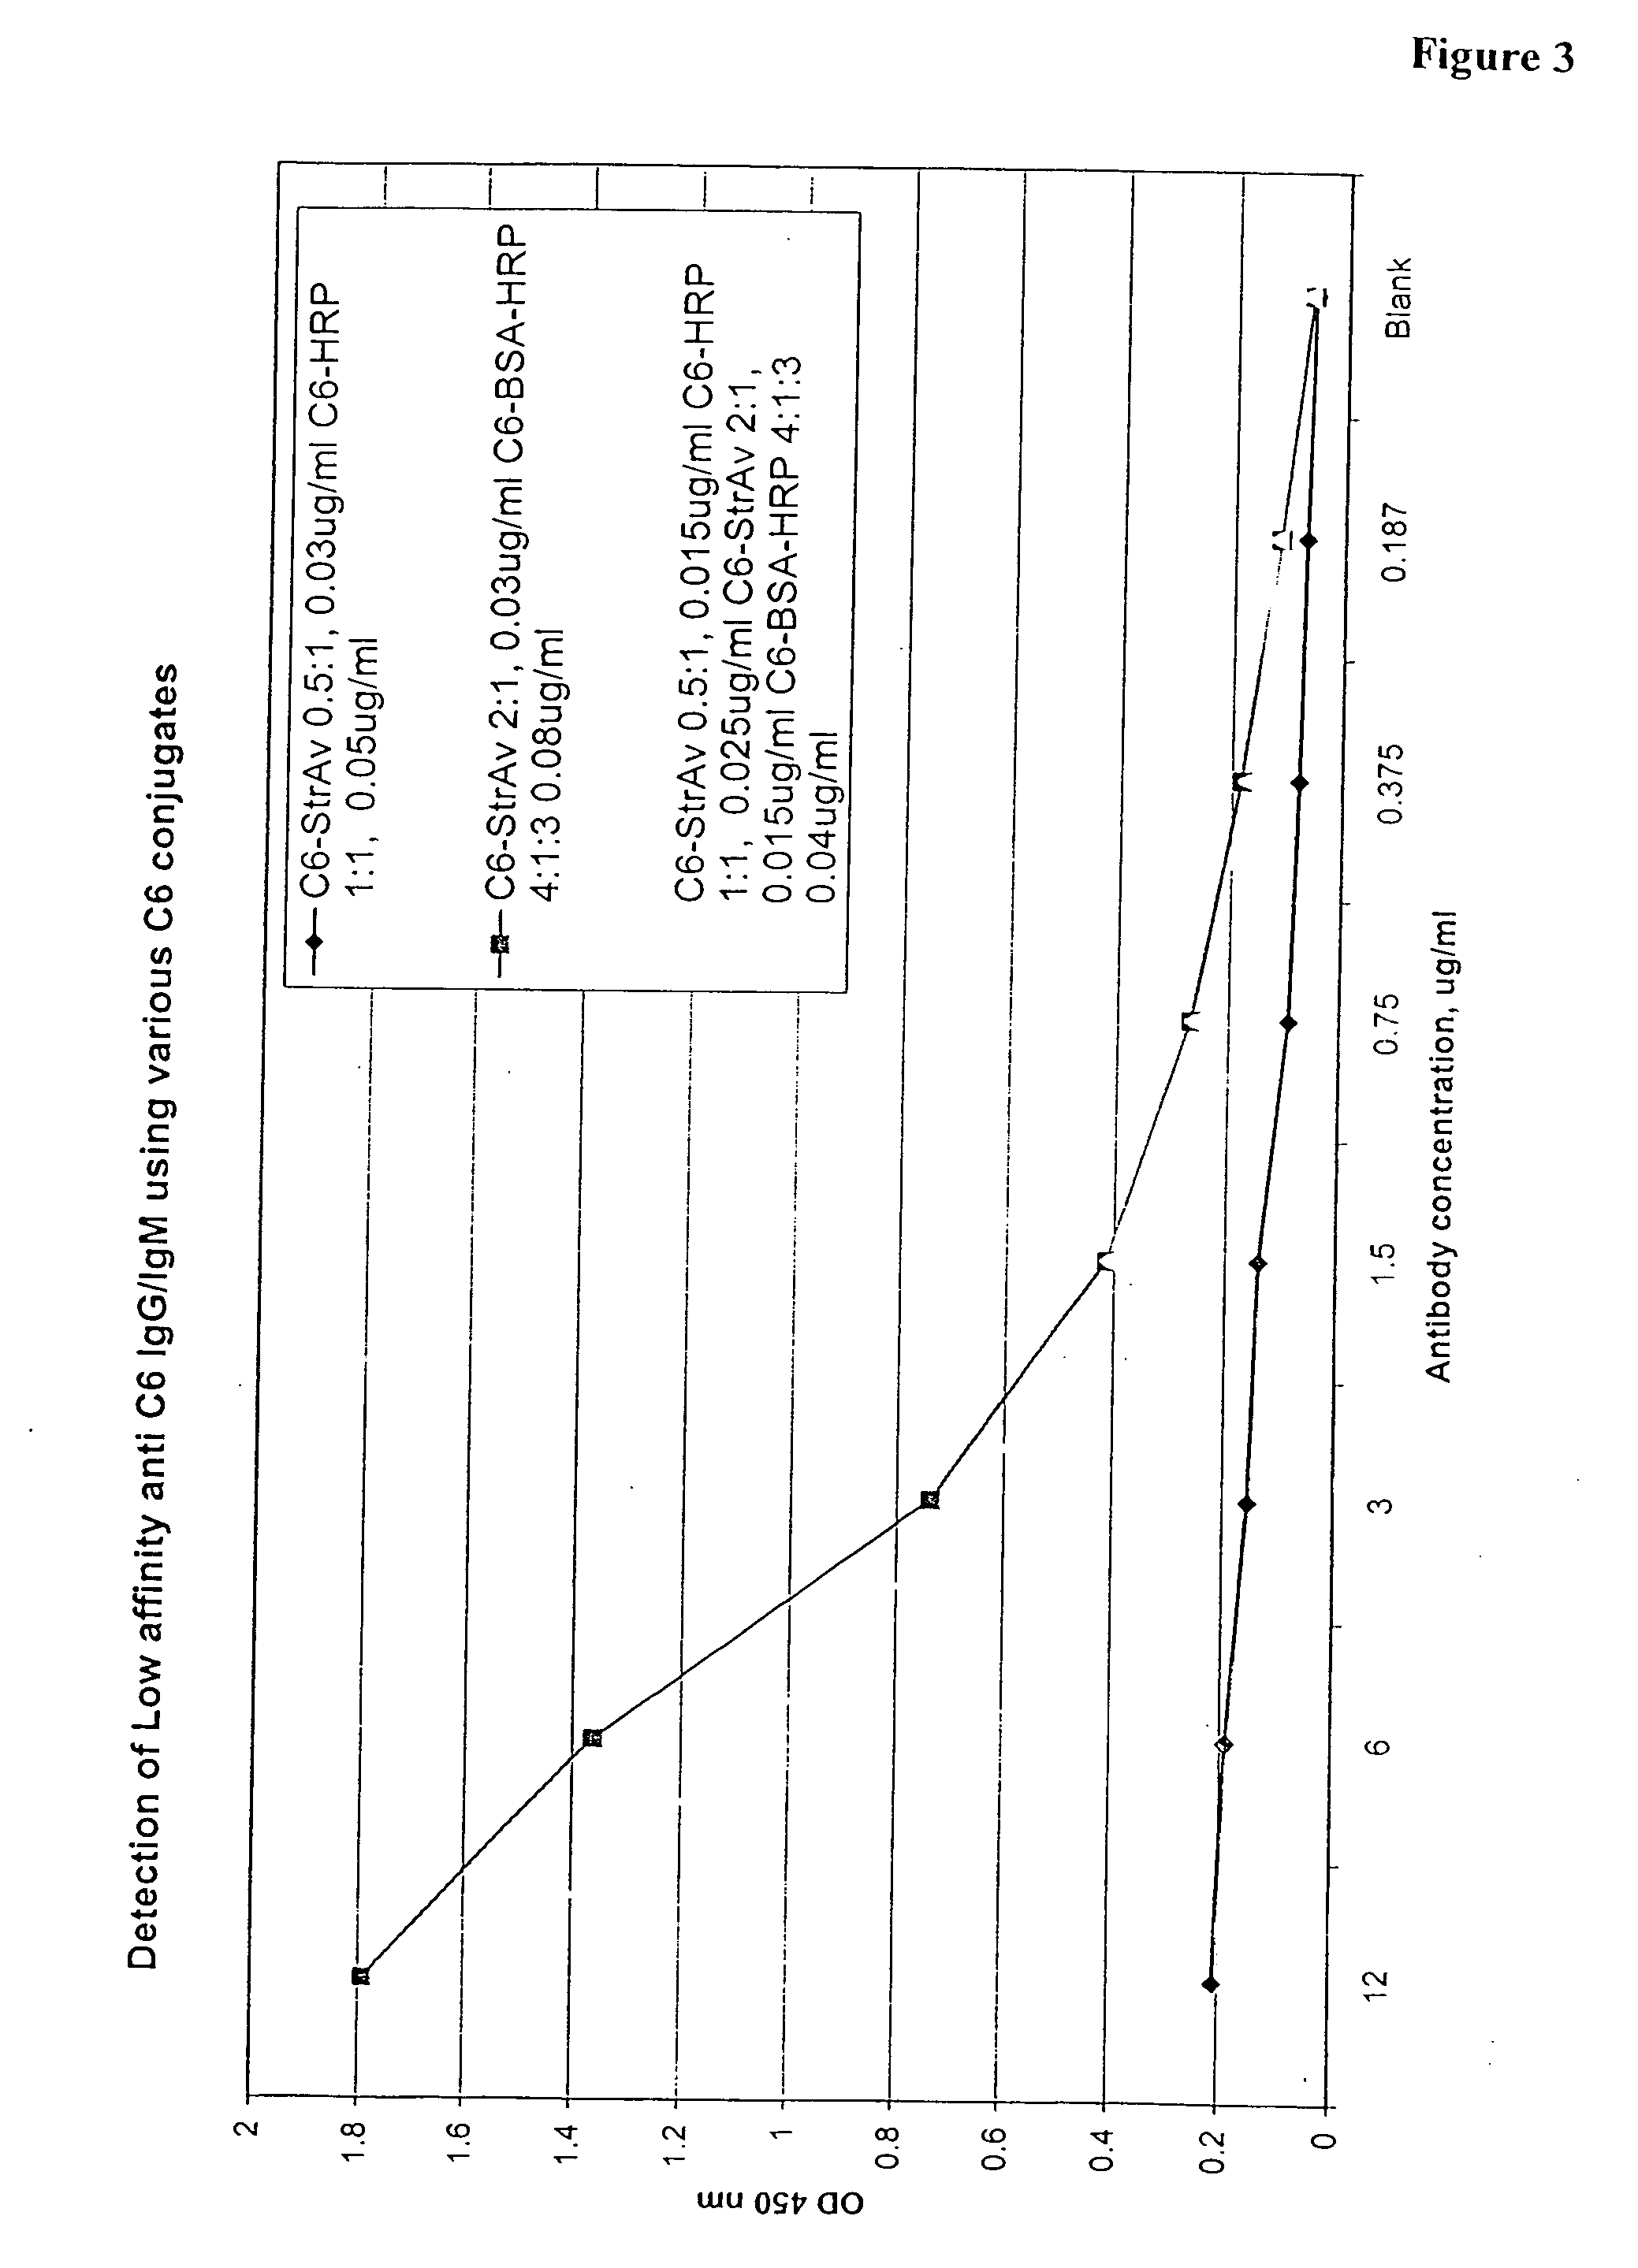 System and methods for detection of bacillus anthracis related analytes in biological fluids